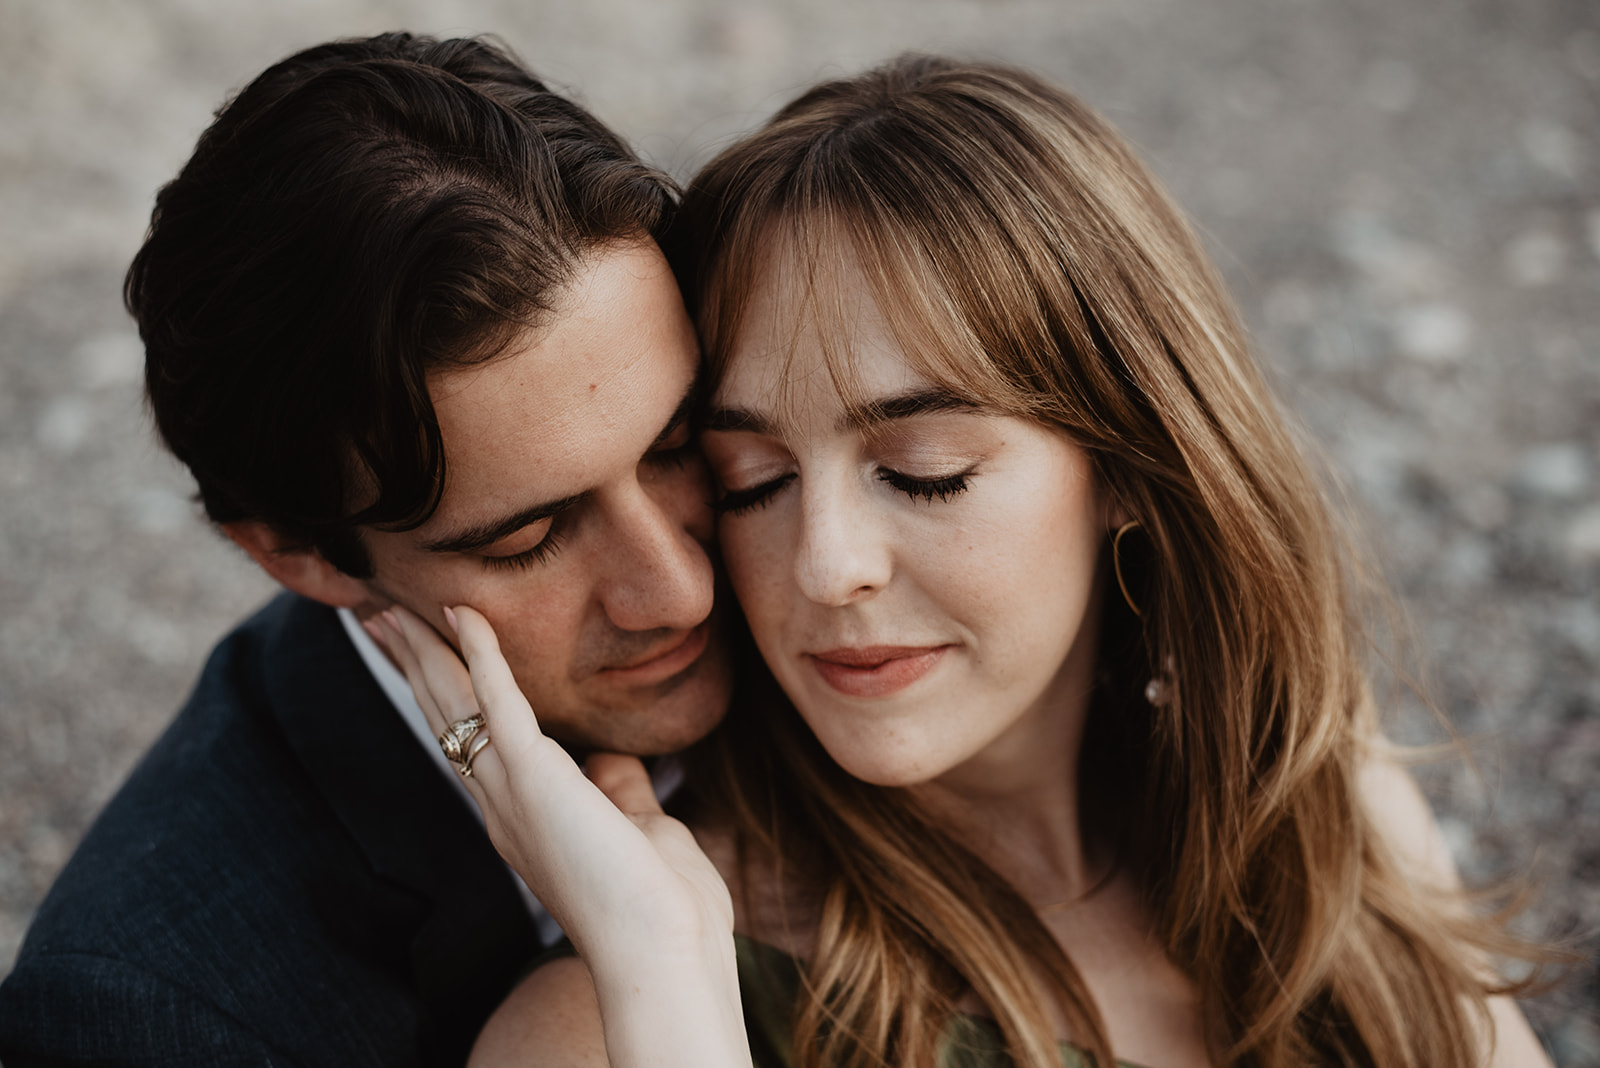 engagement portrait with man and woman holding each other closely as the woman holds the mans cheek